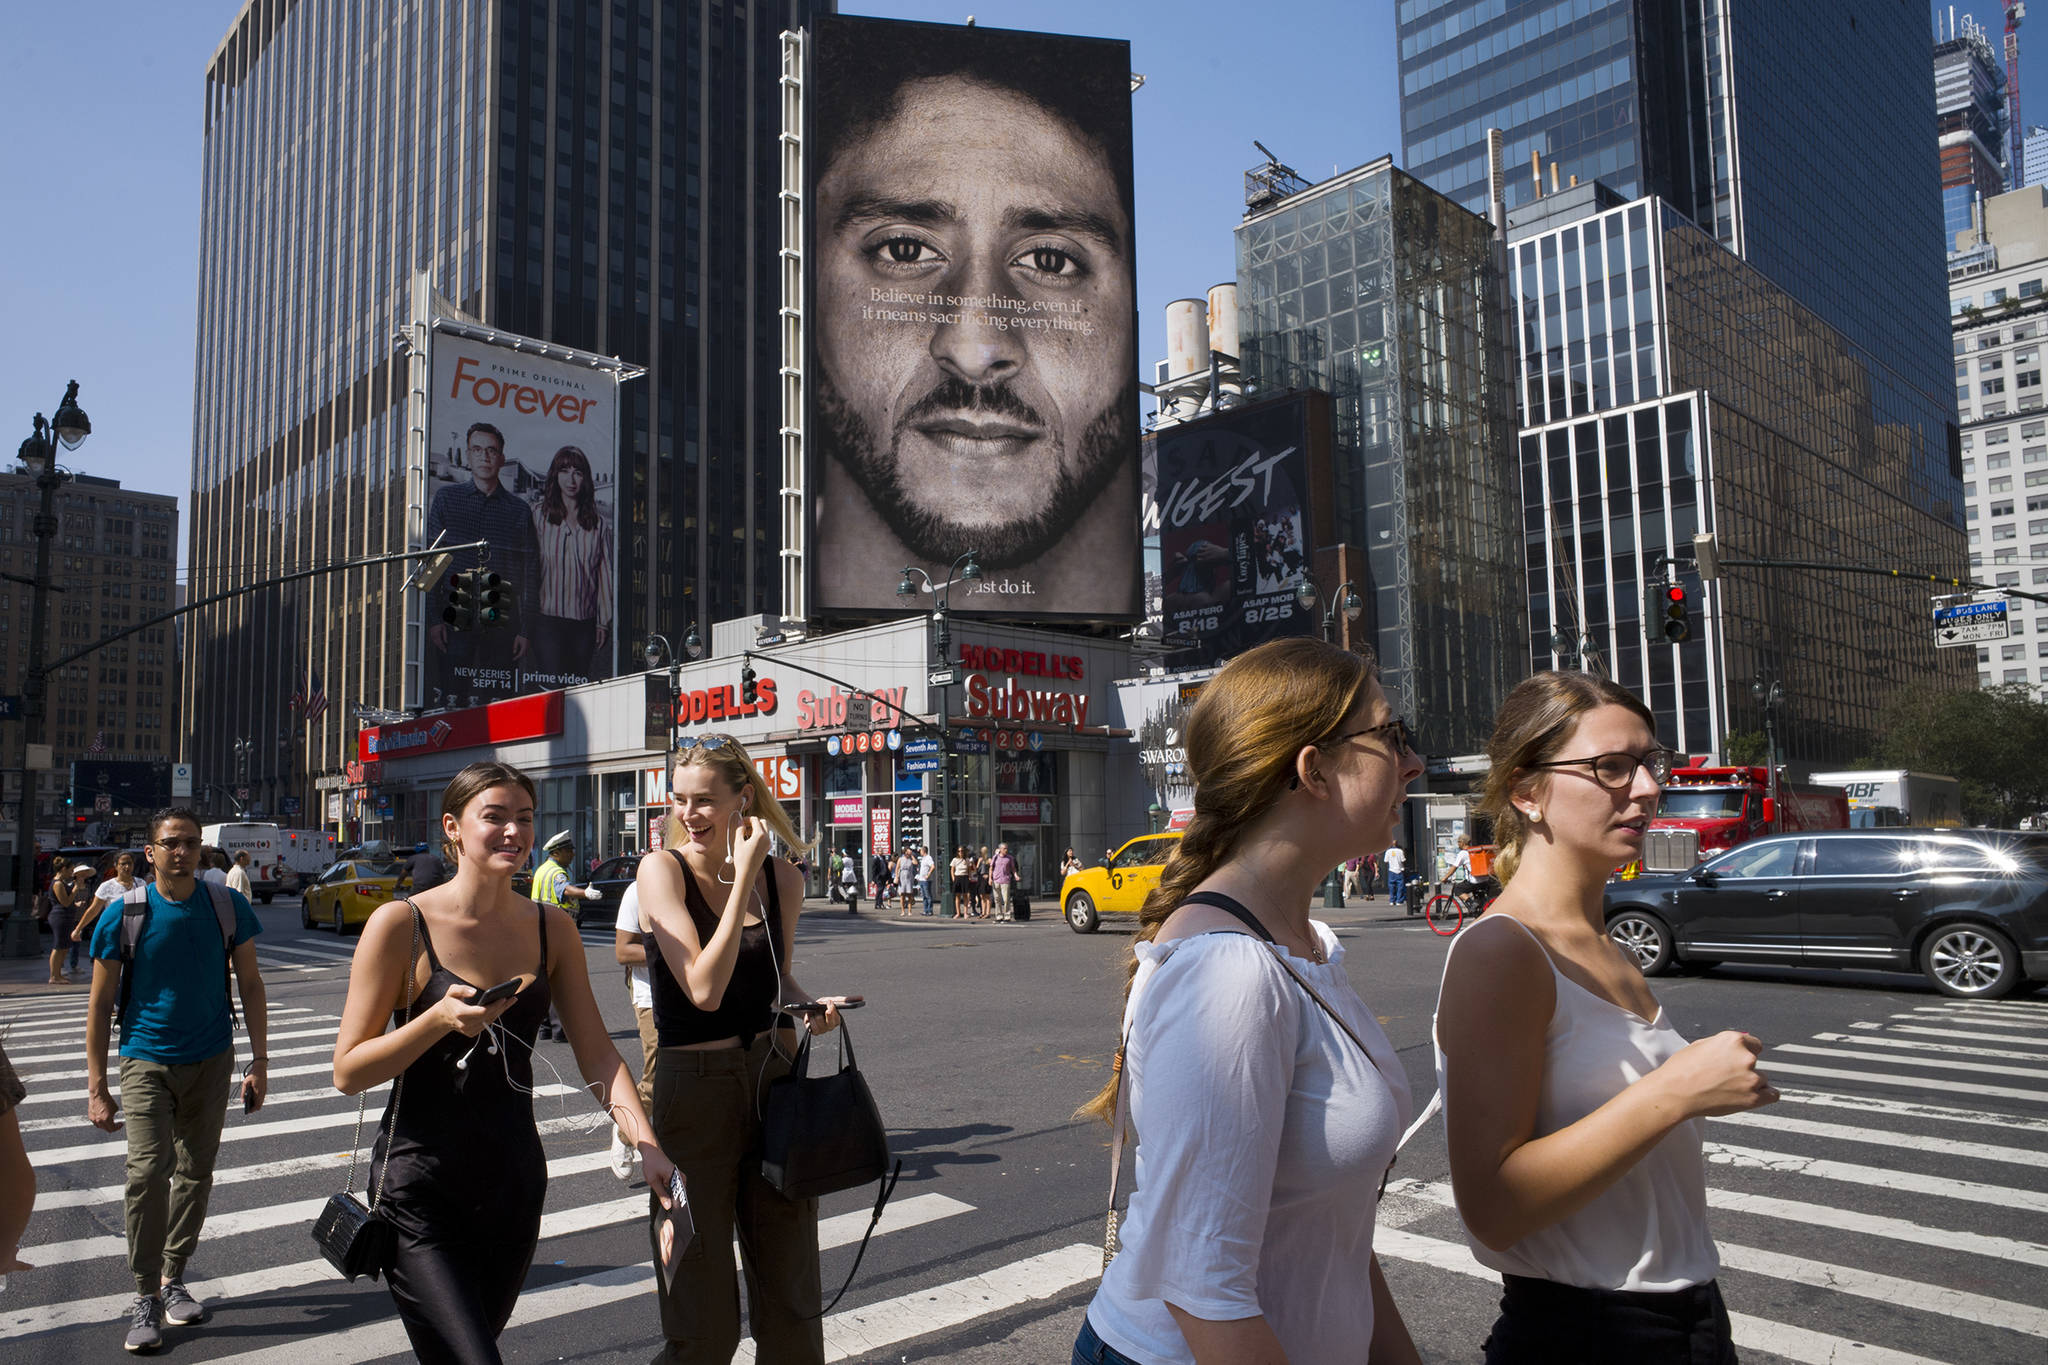 In this Sept. 6, 2018, file photo, people in New York walk past a Nike advertisement featuring former San Francisco 49ers quarterback Colin Kaepernick, known for kneeling during the national anthem to protest police brutality and racial inequality. In response to Nike’s support of Kaepernick, the Rhode Island town of North Smithfield is considering asking its departments to refrain from purchasing Nike products. (AP File Photo | Mark Lennihan)